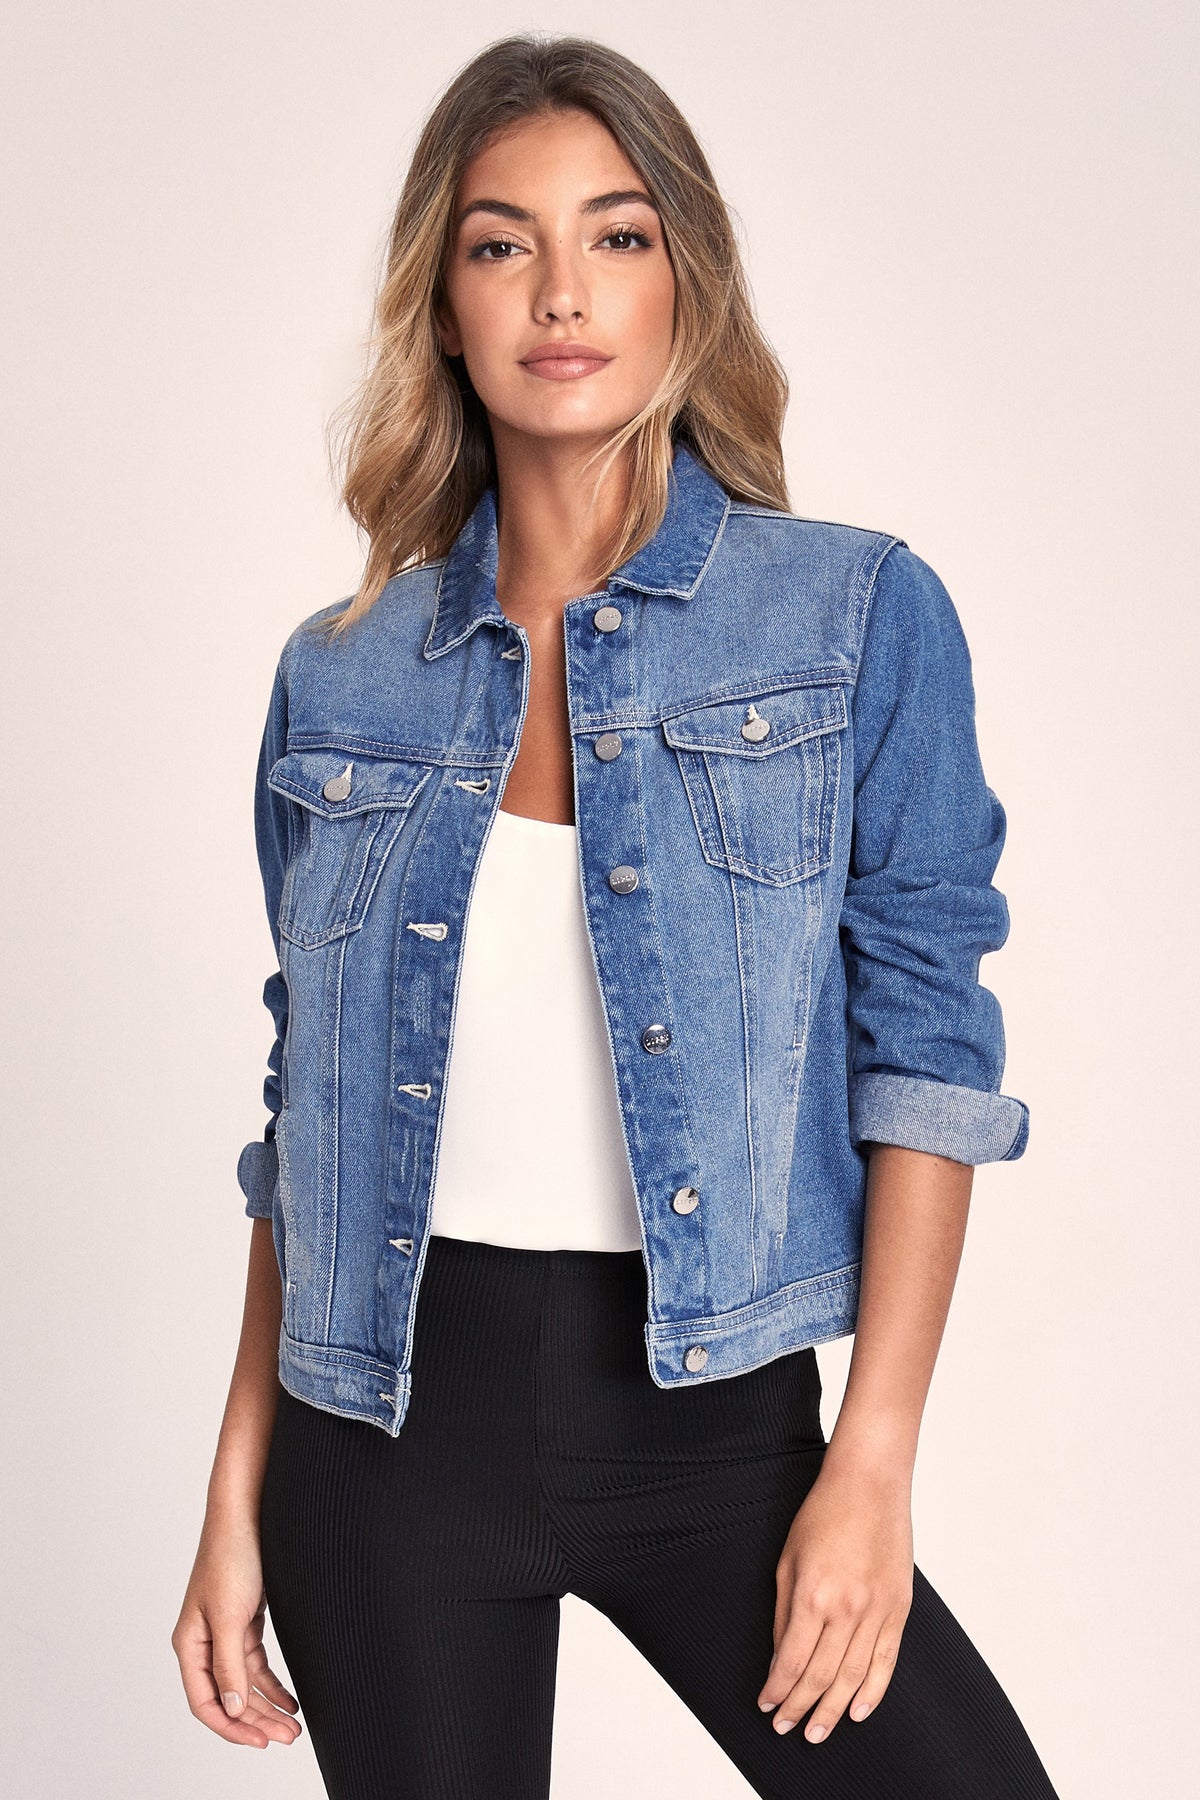 Stylish denim jacket for women, solid blue color, featuring a classic jean jacket design with button closures.